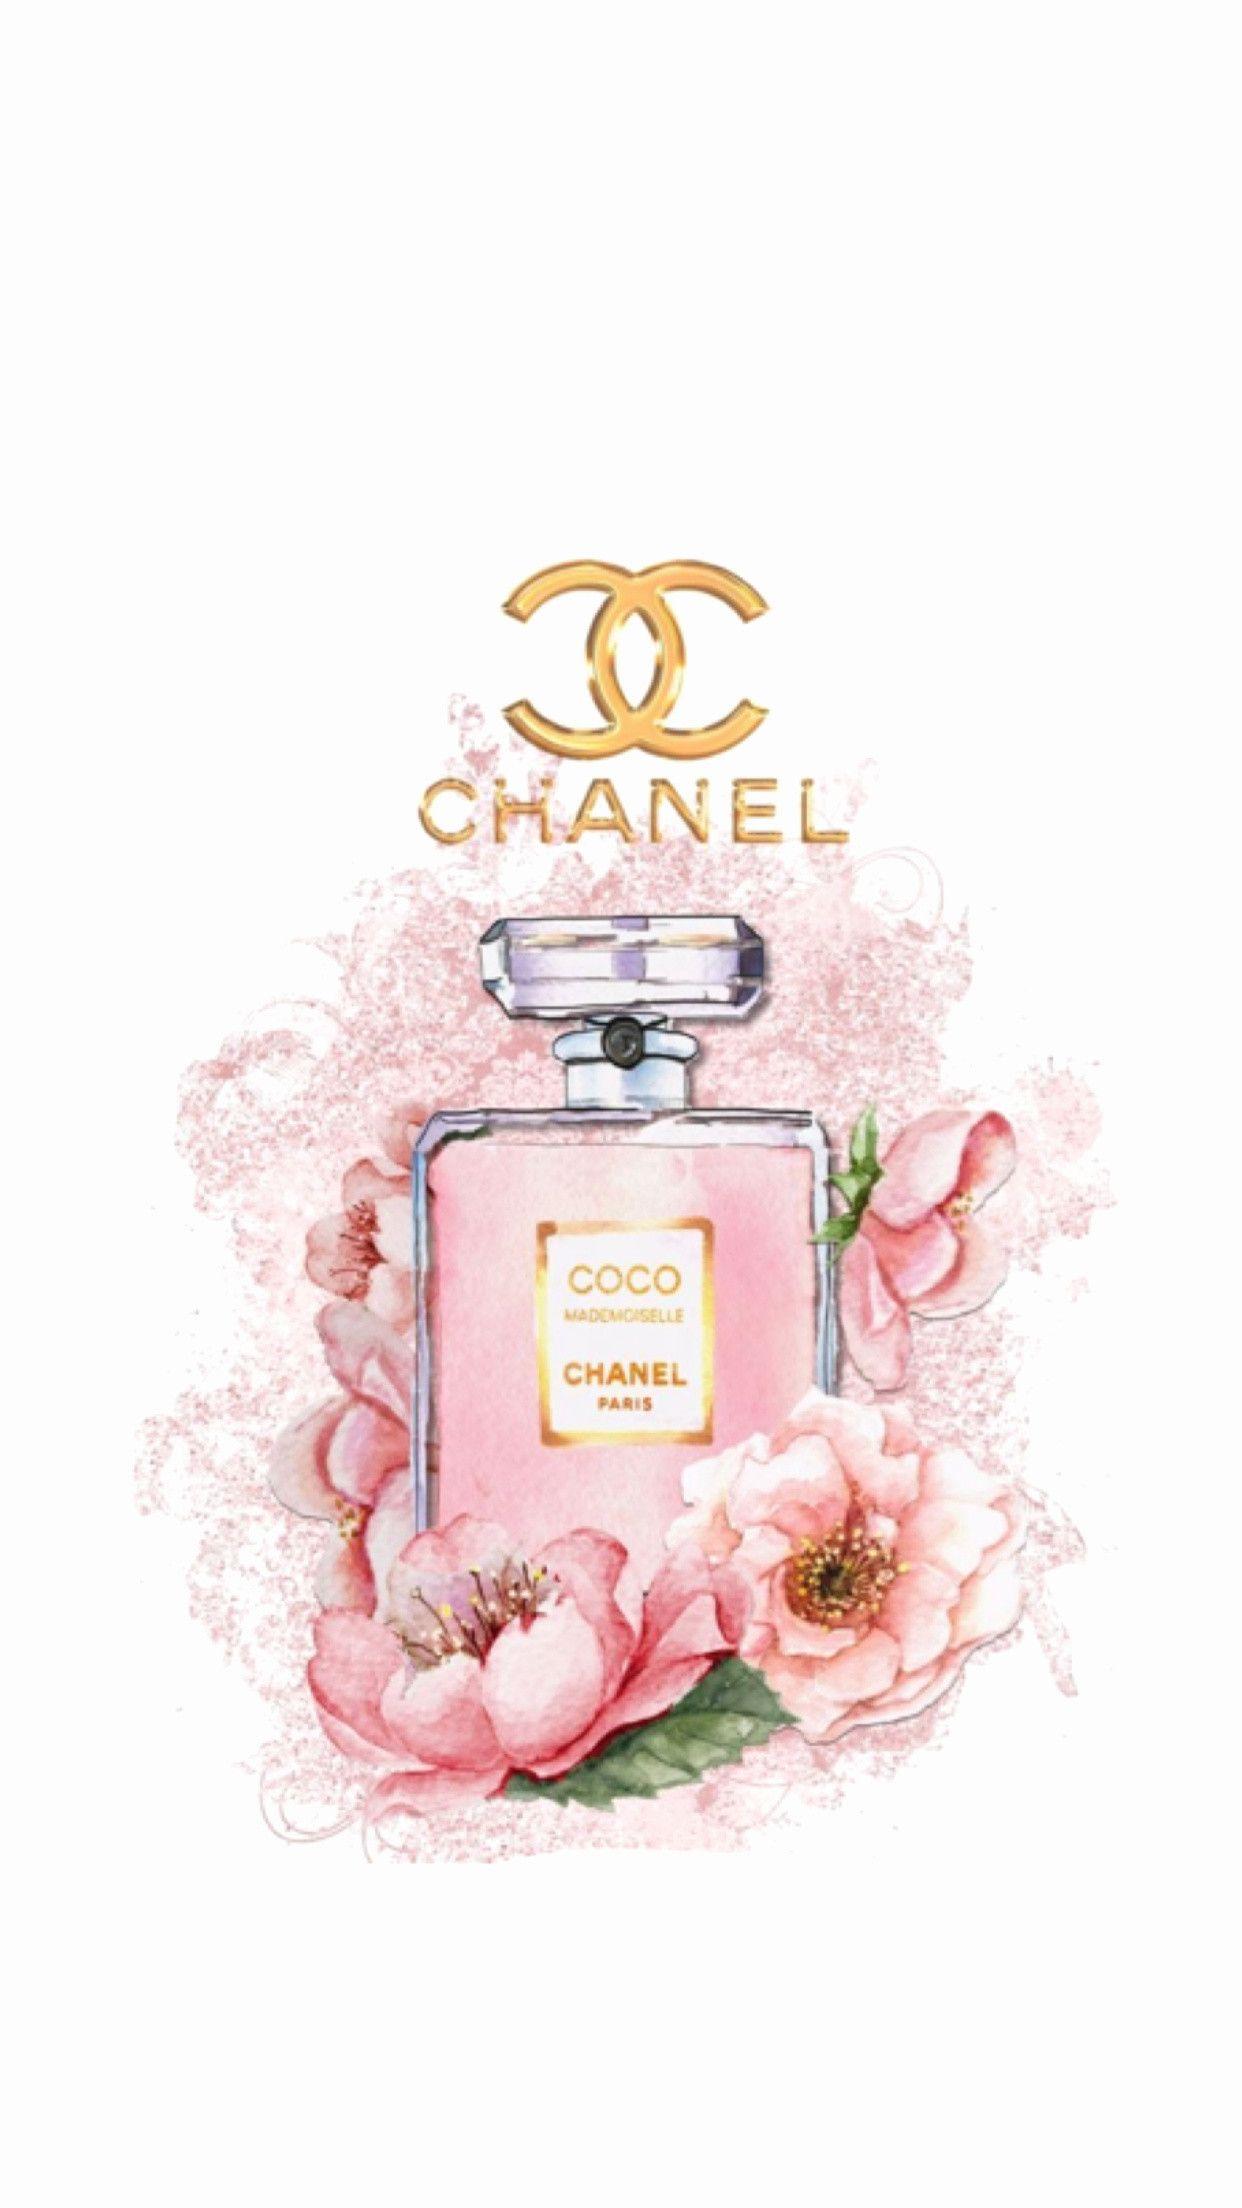 Coco Chanel Iphone Wallpapers Top Free Coco Chanel Iphone Backgrounds Wallpaperaccess